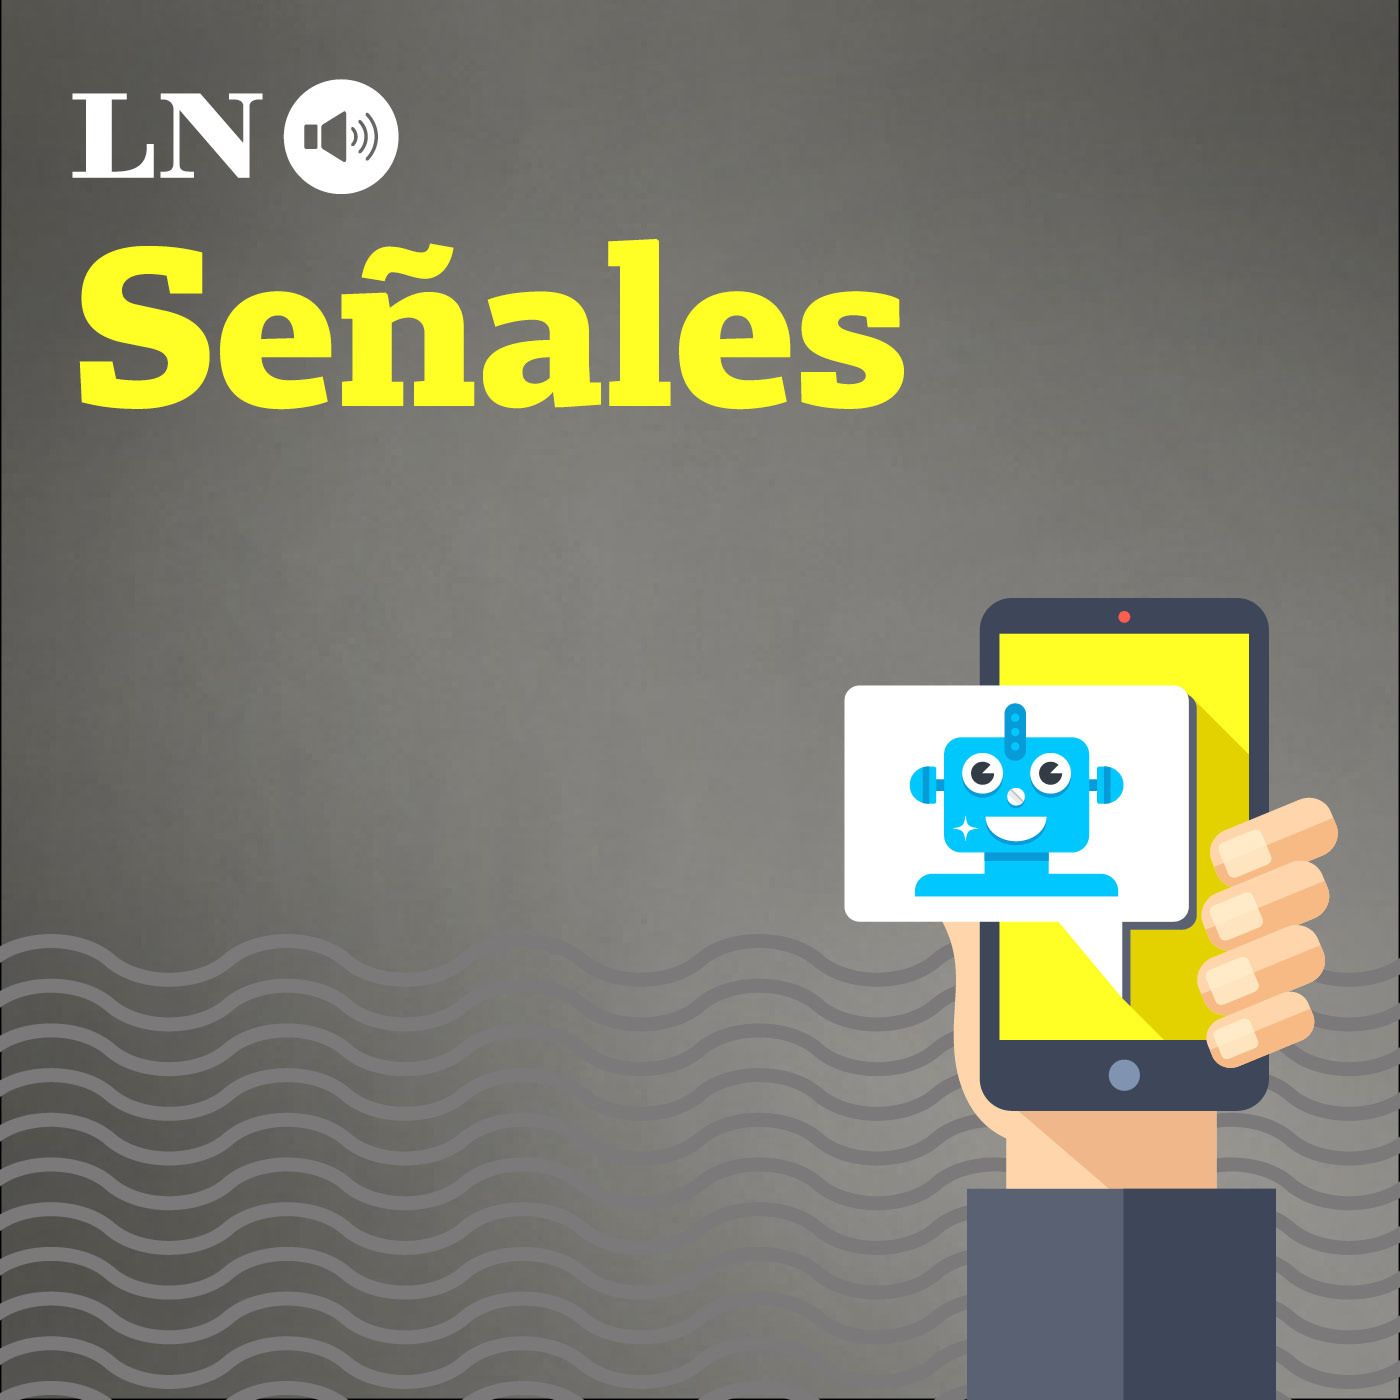 Señales Podcast - Listen, Reviews, Charts - Chartable